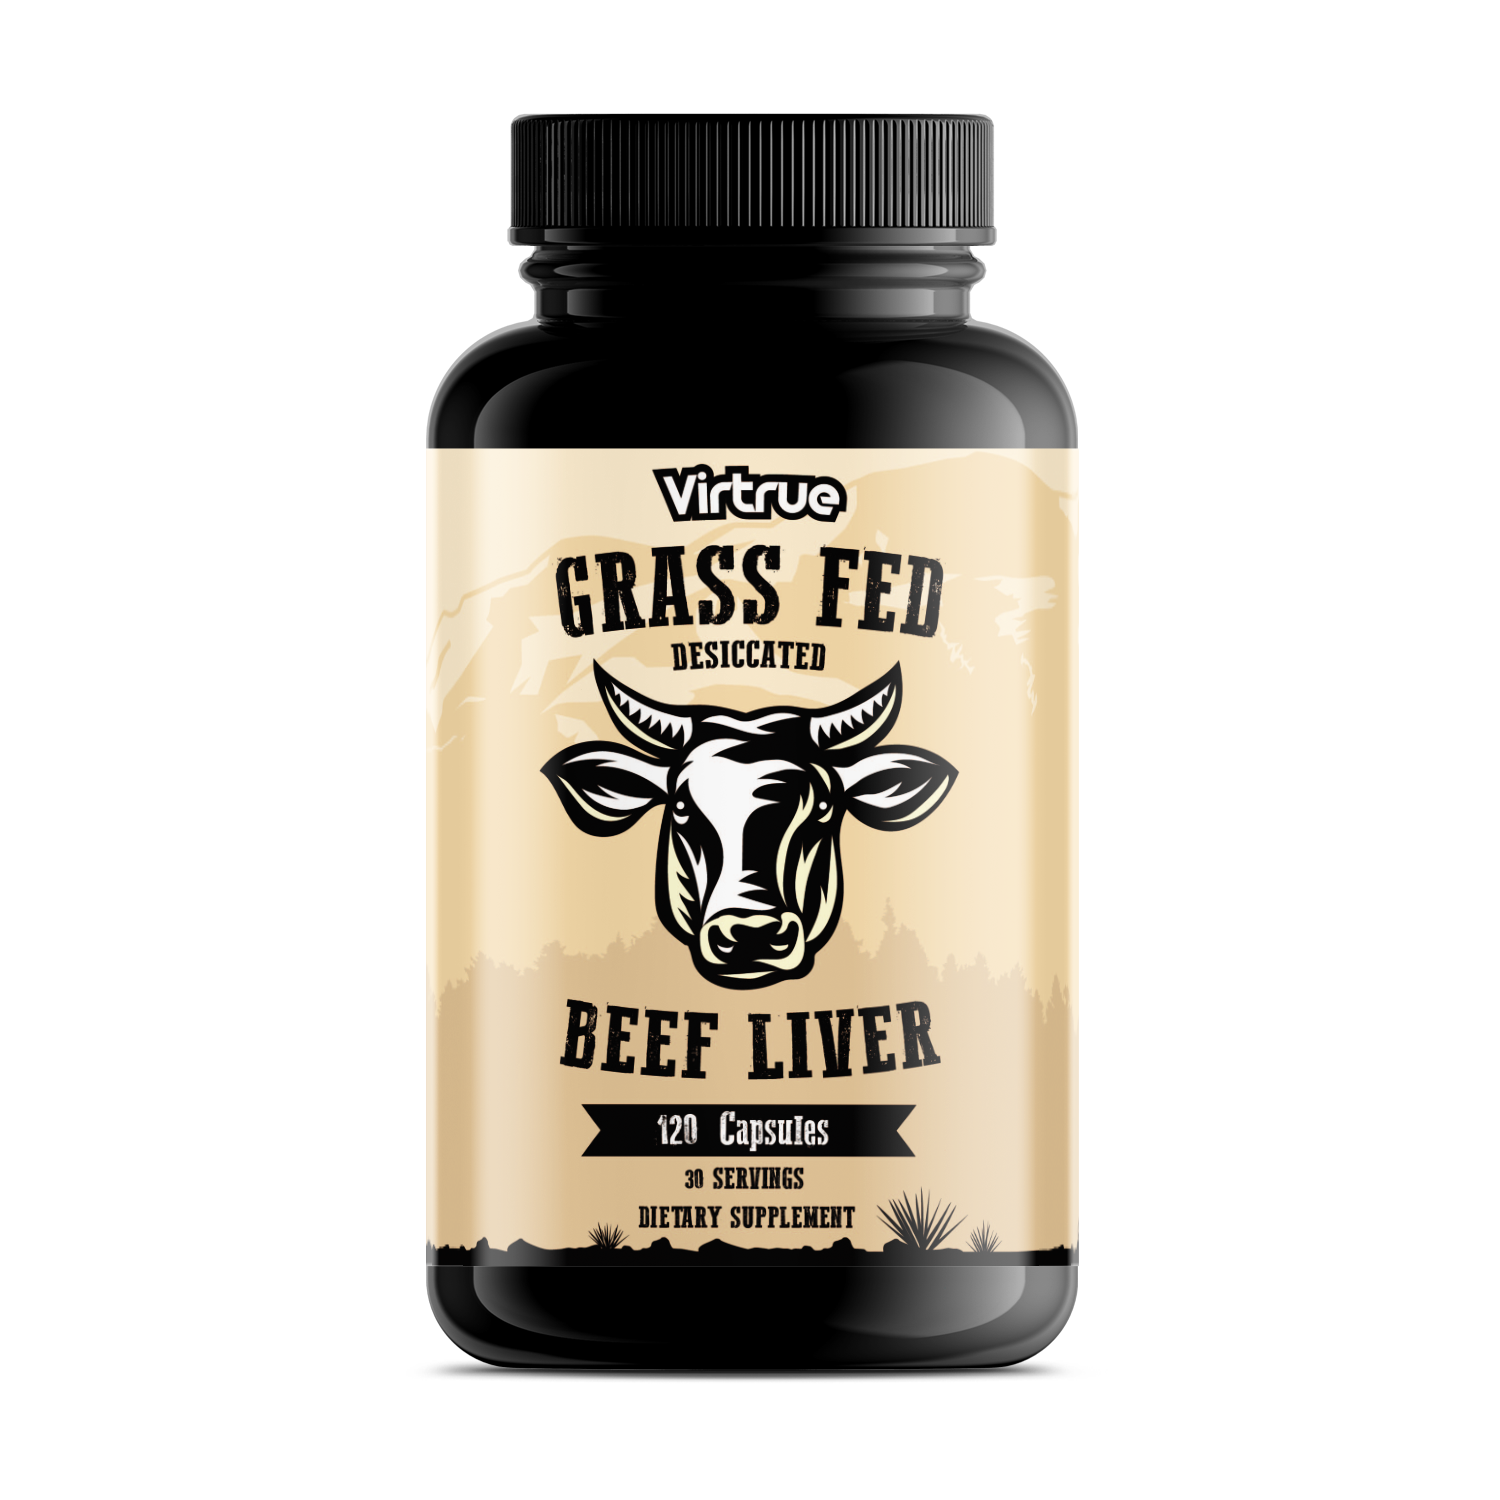 Grass Fed Desiccated Beef Liver Capsules